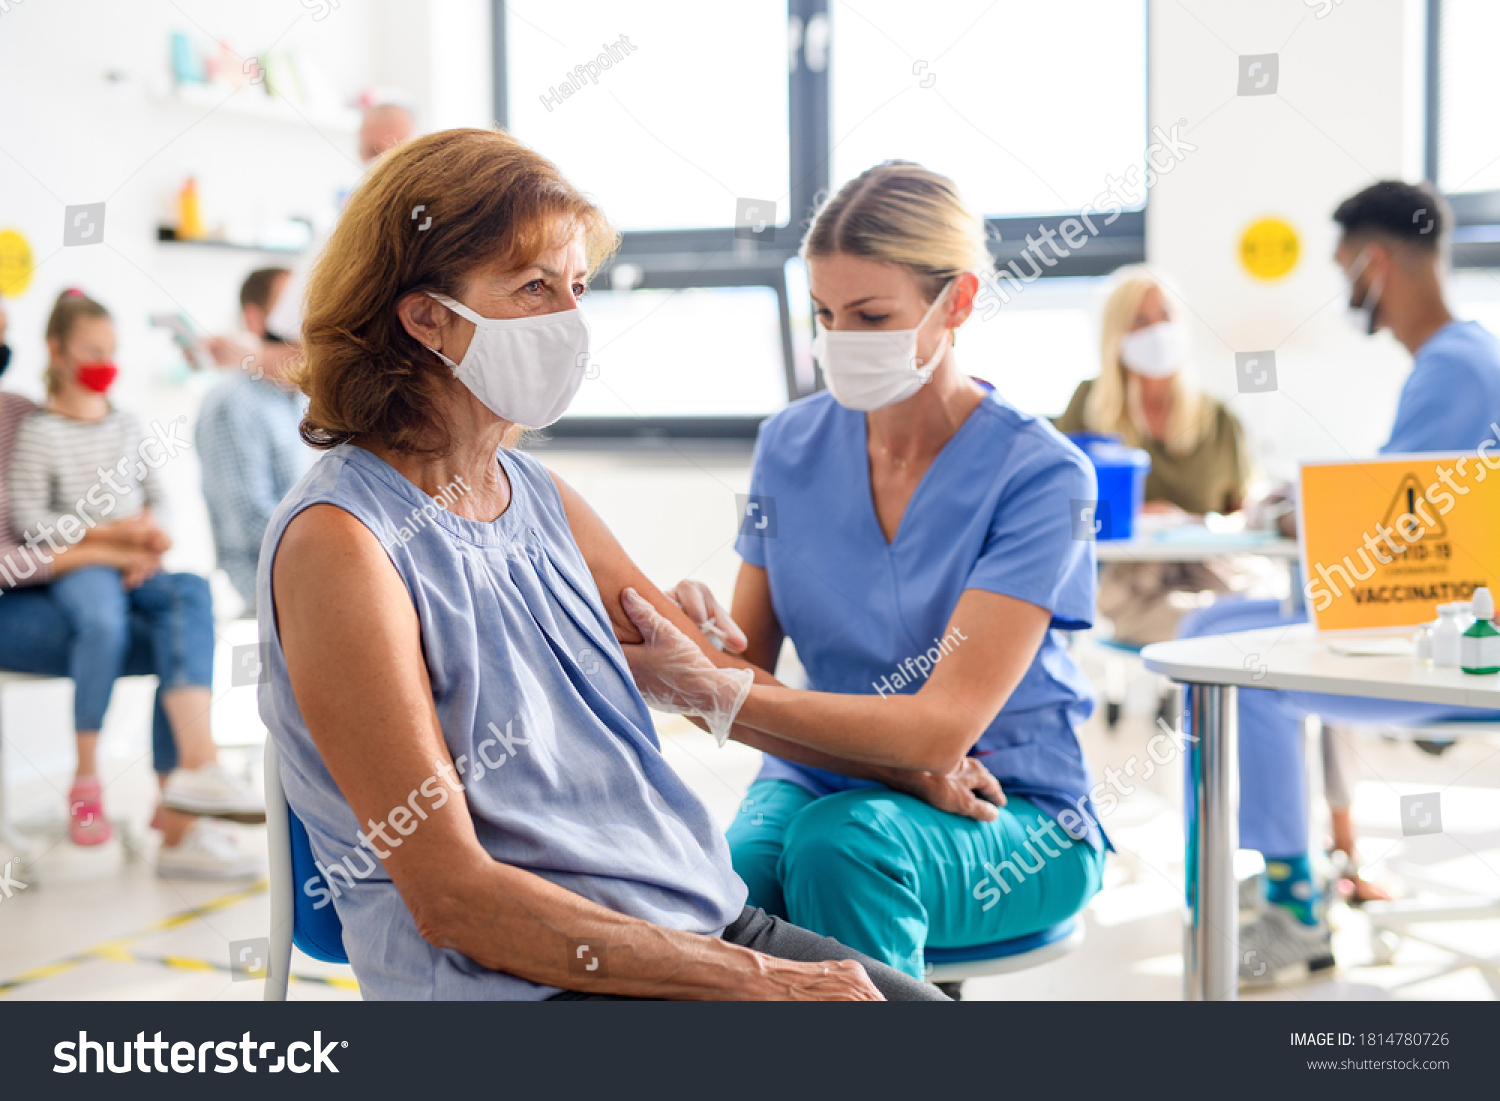 Woman with face mask getting vaccinated, coronavirus, covid-19 and vaccination concept. #1814780726